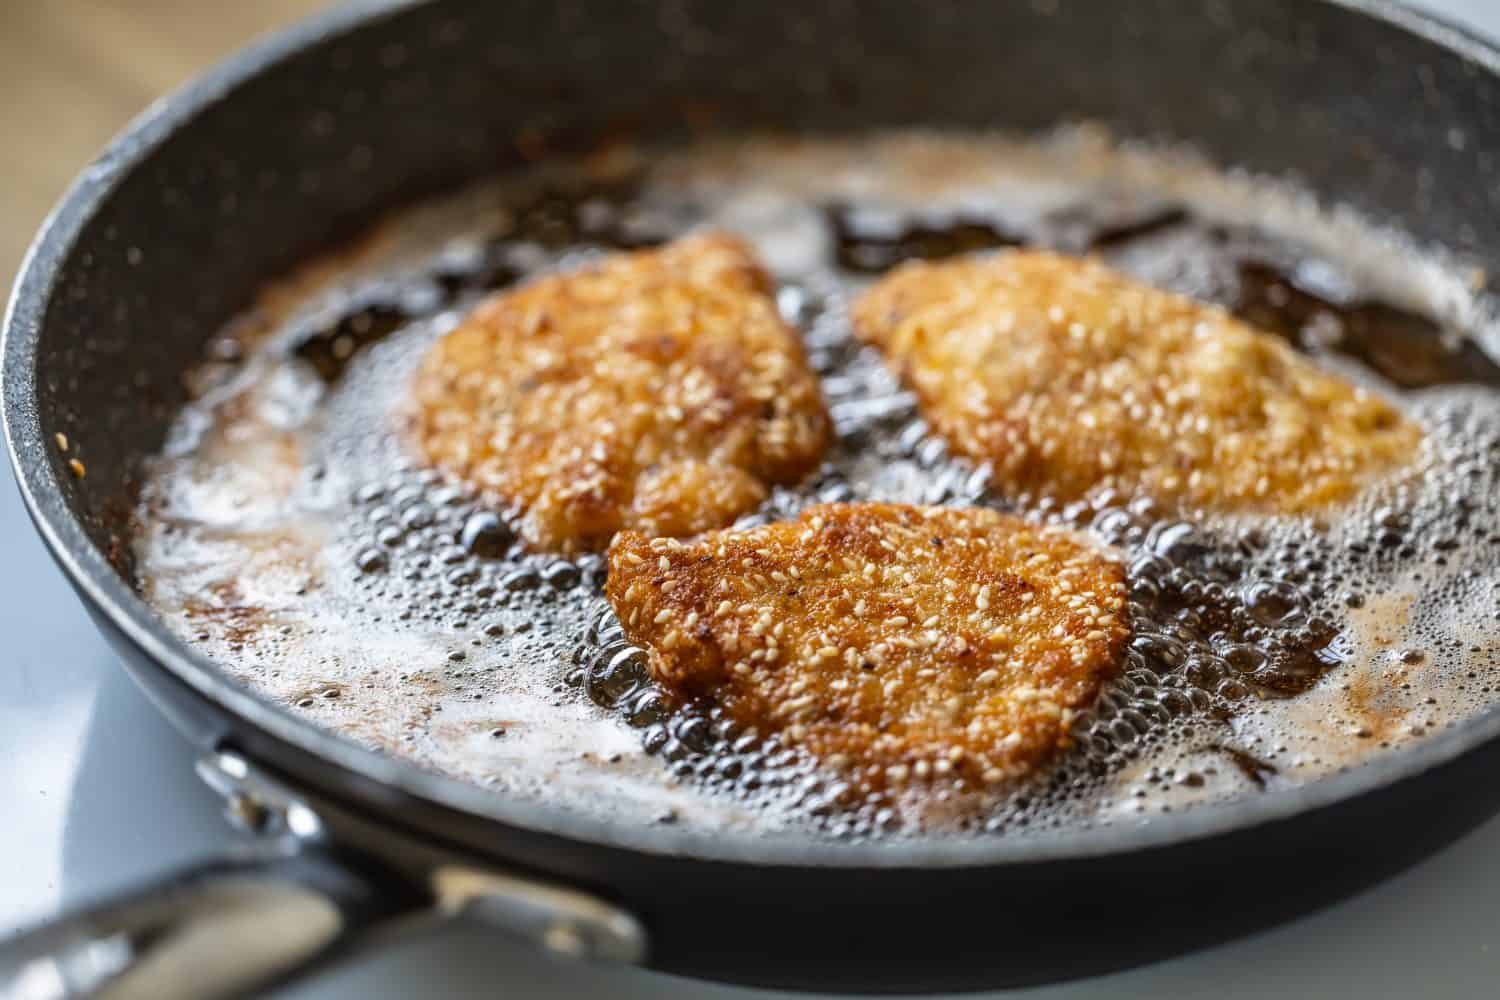 Breaded schnitzels are frying in a sizzling pan making the traditional vienese food.